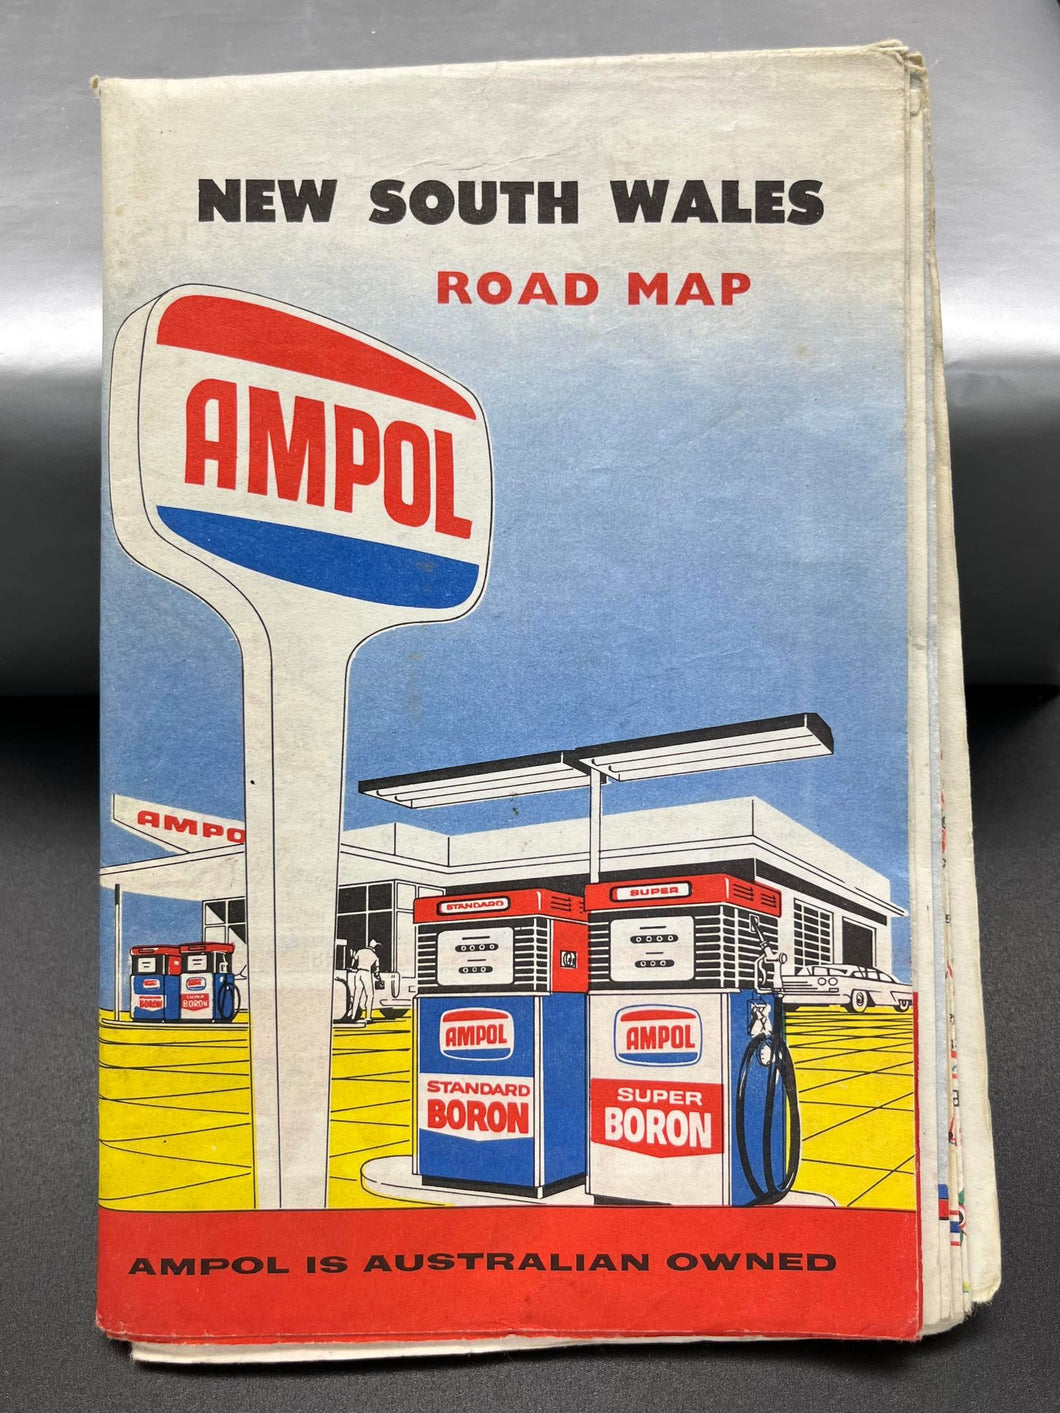 Ampol Road Map - New South Wales